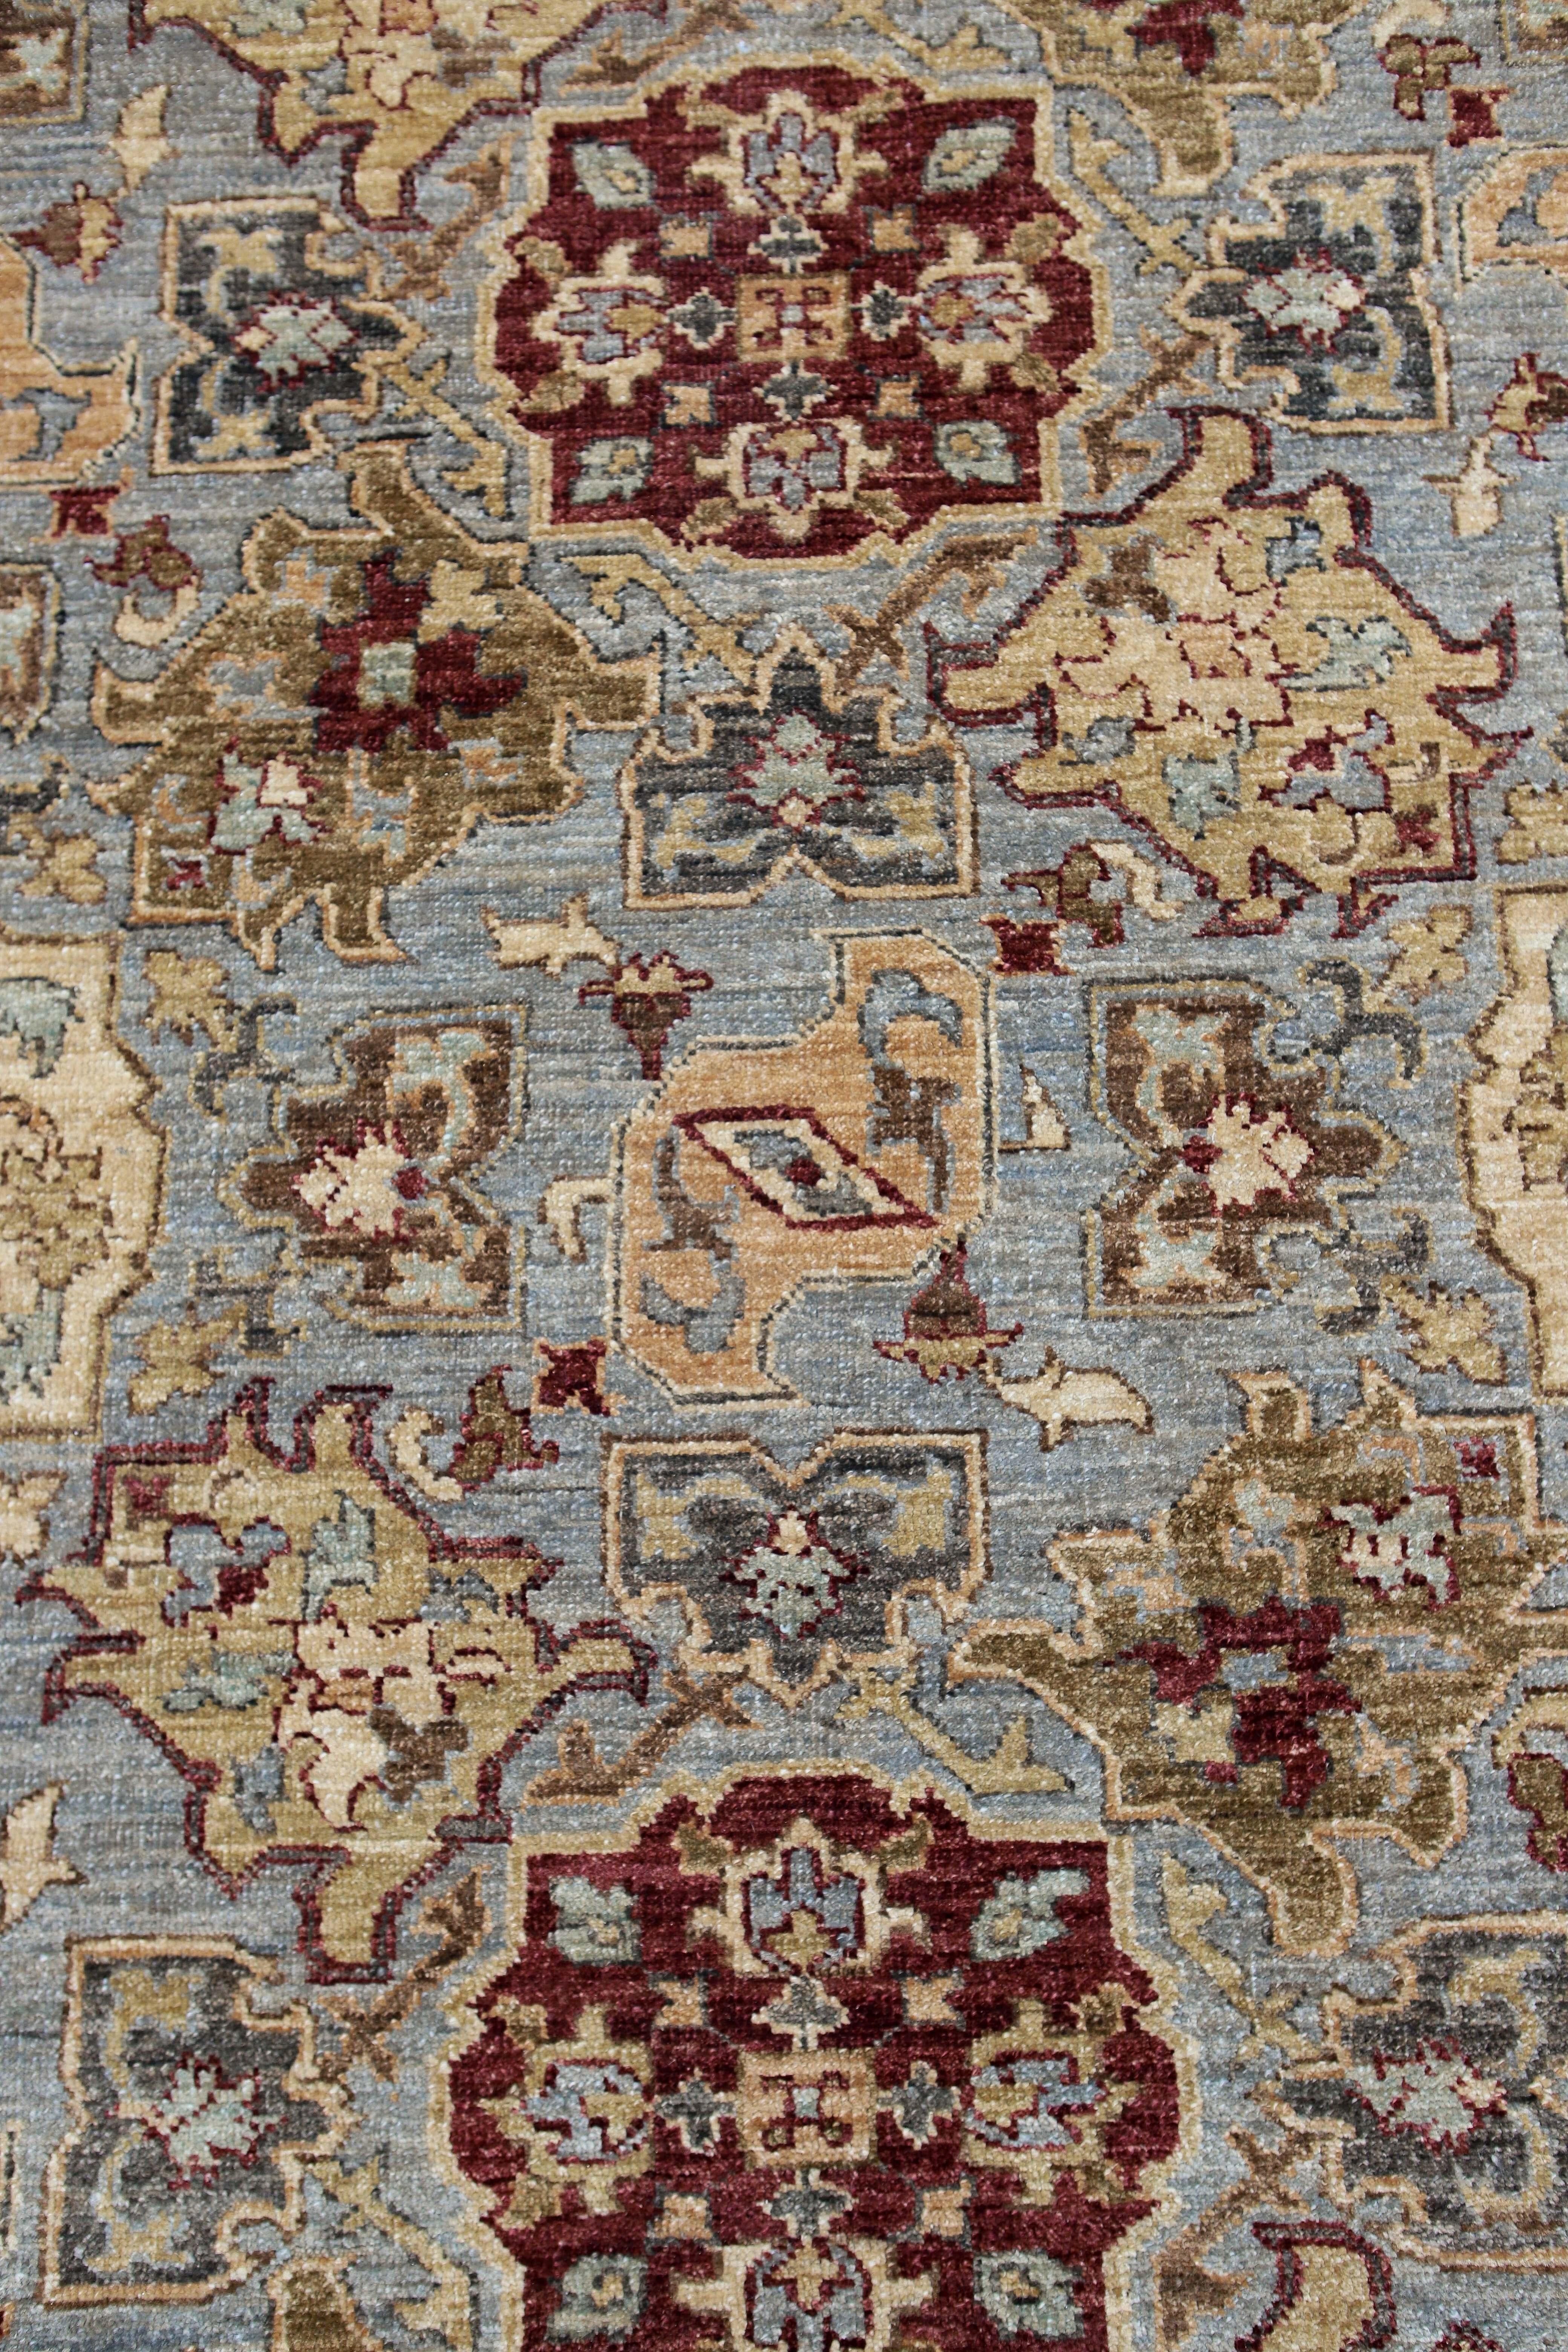 Transitional Afghan designed 10 x 14 rug.
Hand knotted with hand-spun wool, woven in Afghanistan. This beautifully designed rug will be sure to stand out in any room.
Made of 100% wool.
Yarn-dyed for vibrant, lasting color. Measures: 9’10’ x